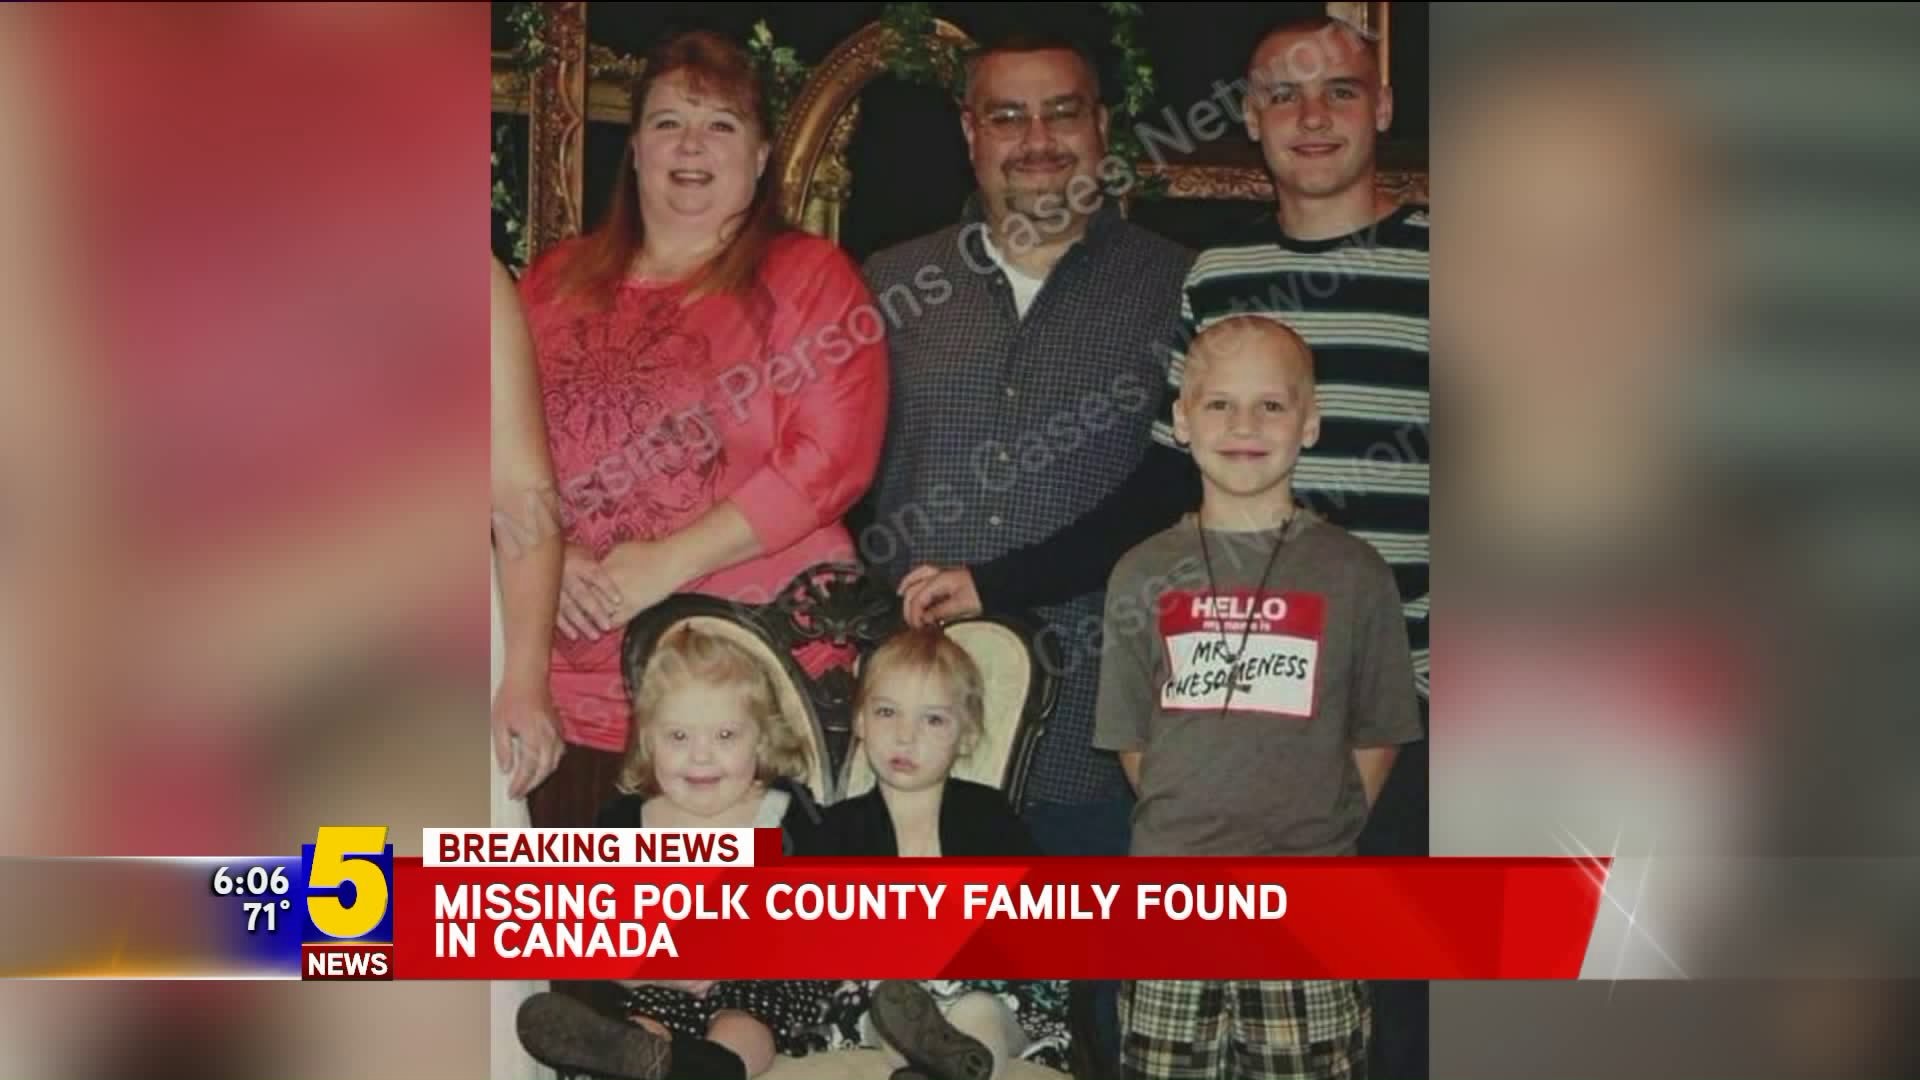 Missing Polk County Family Found in Canada